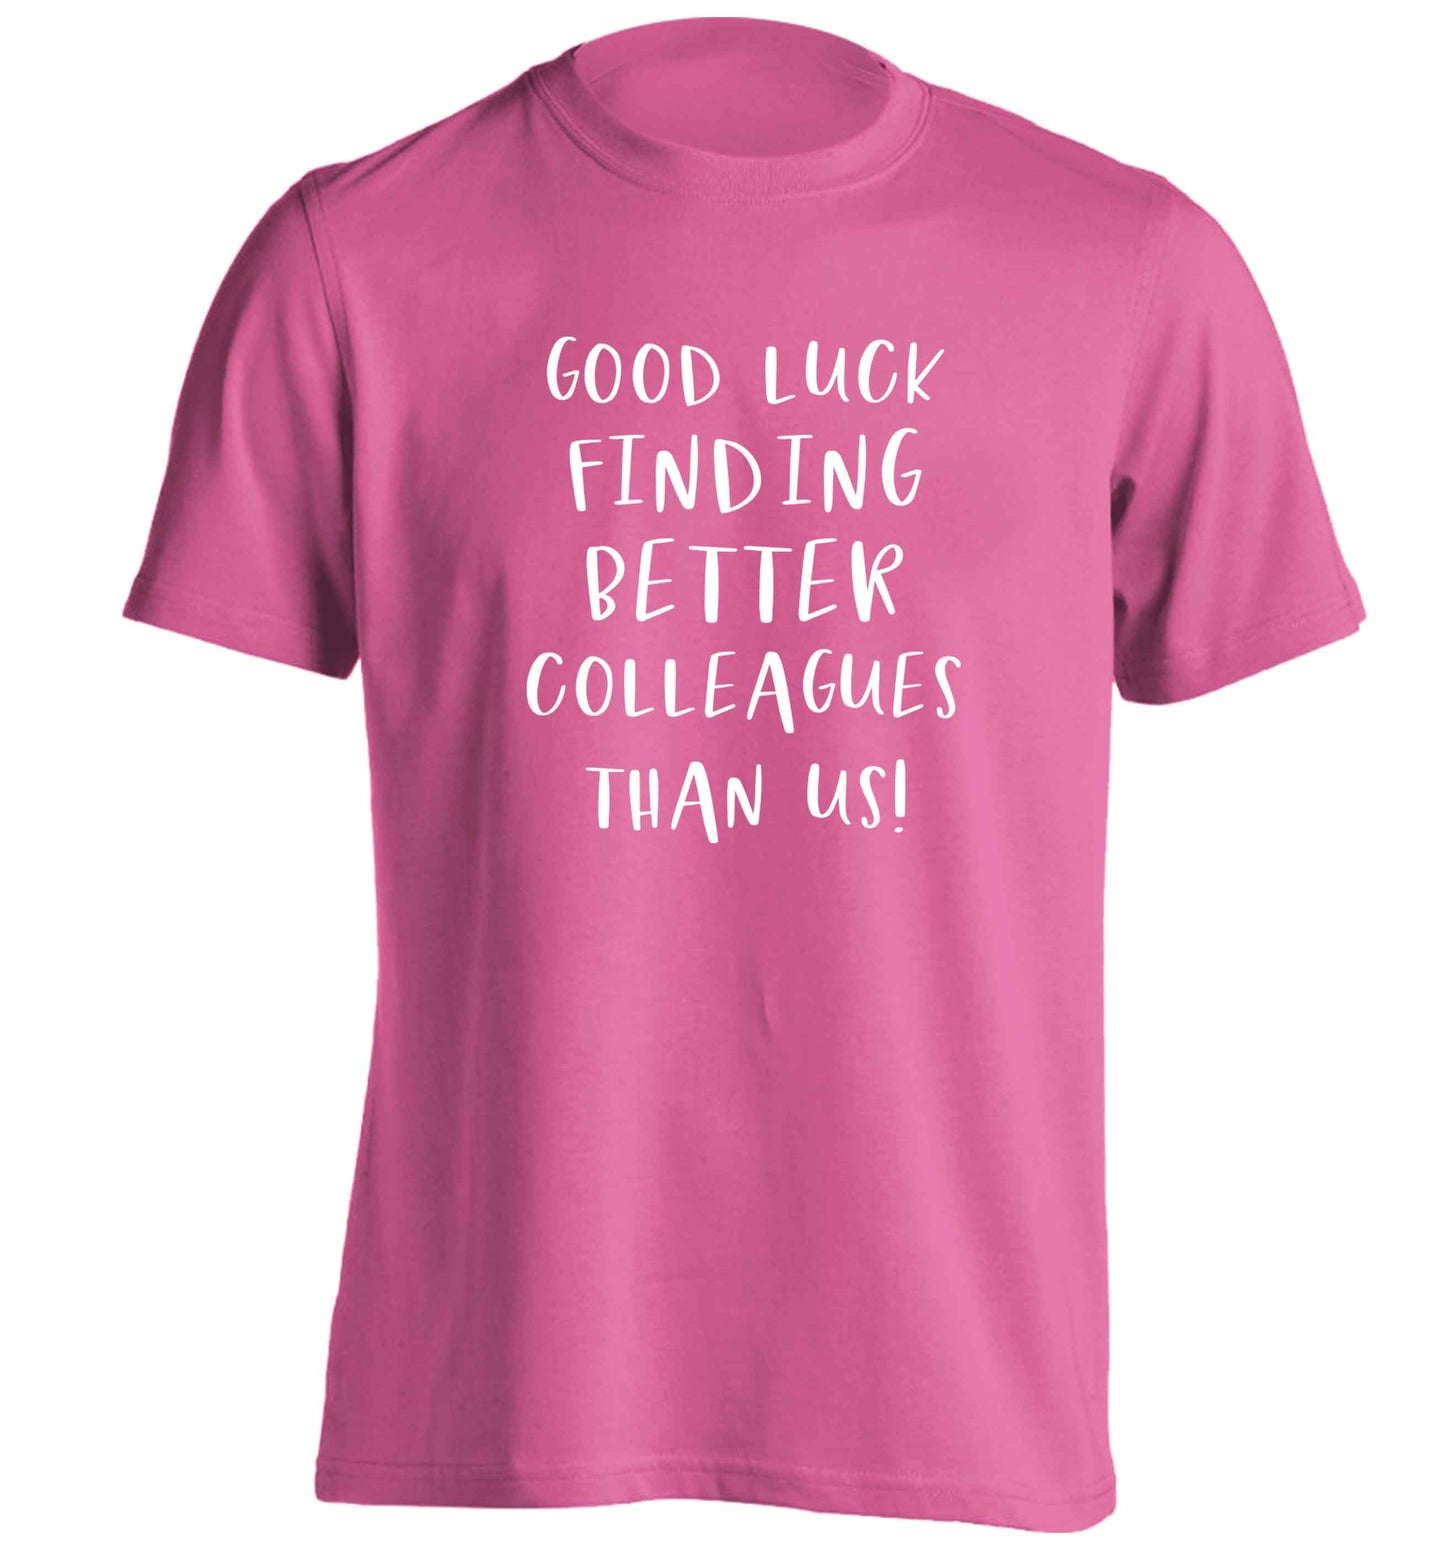 Good luck finding better colleagues than us! adults unisex pink Tshirt 2XL